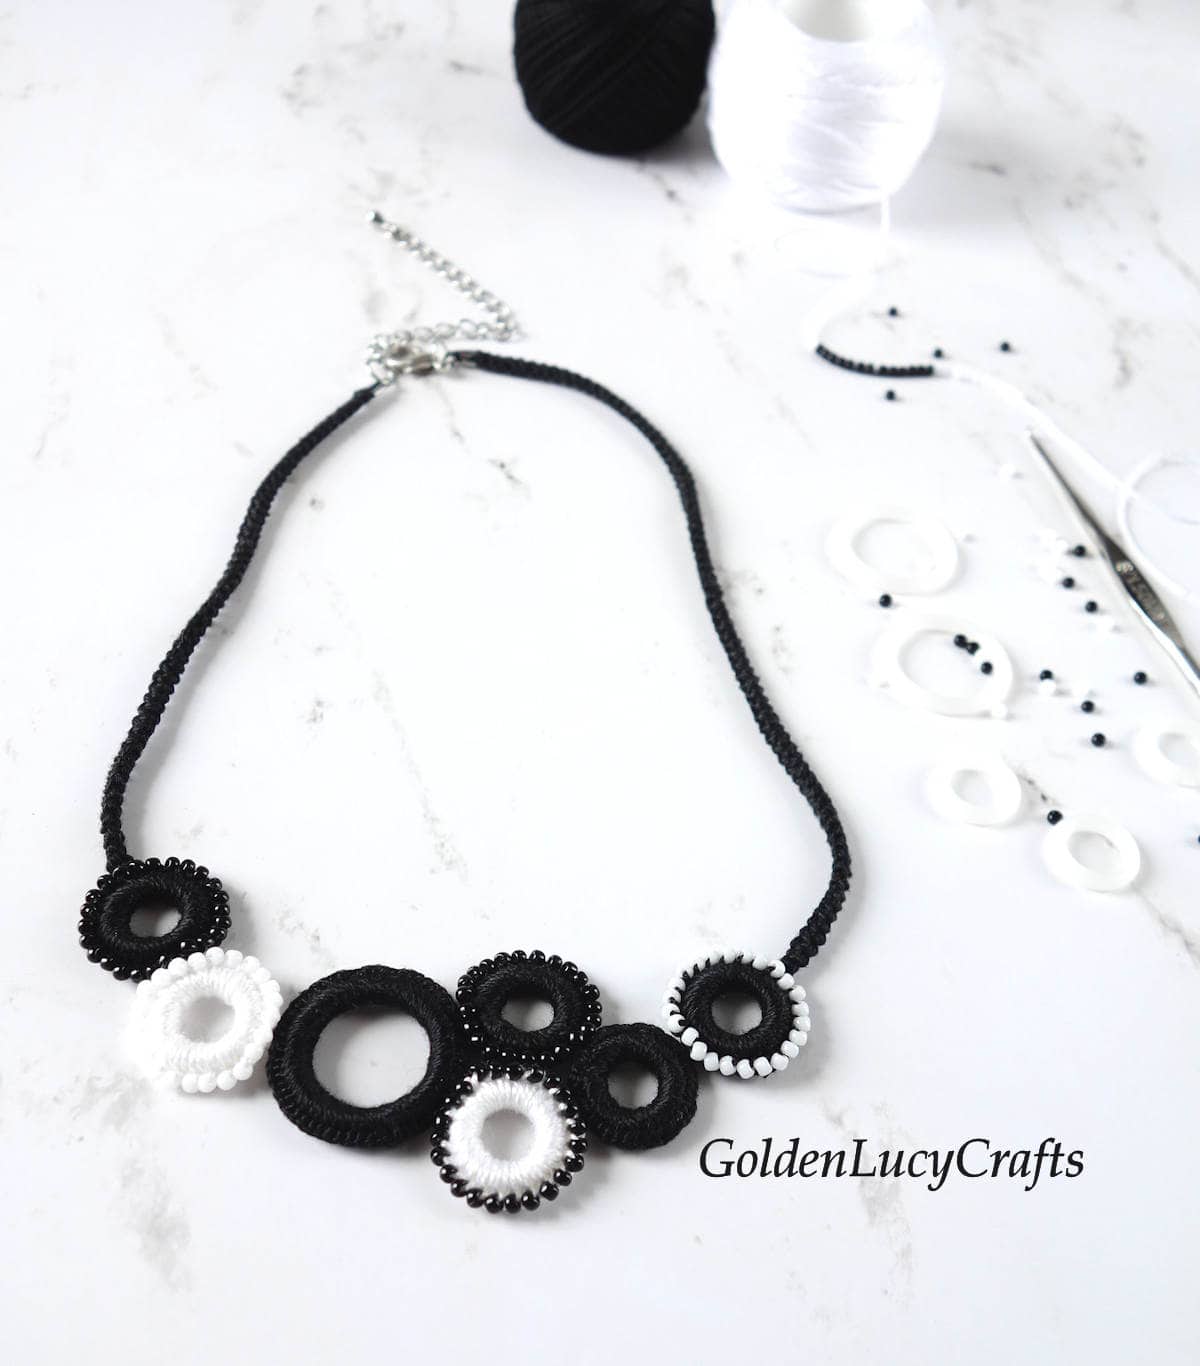 Crocheted necklace made of small black and white rings.